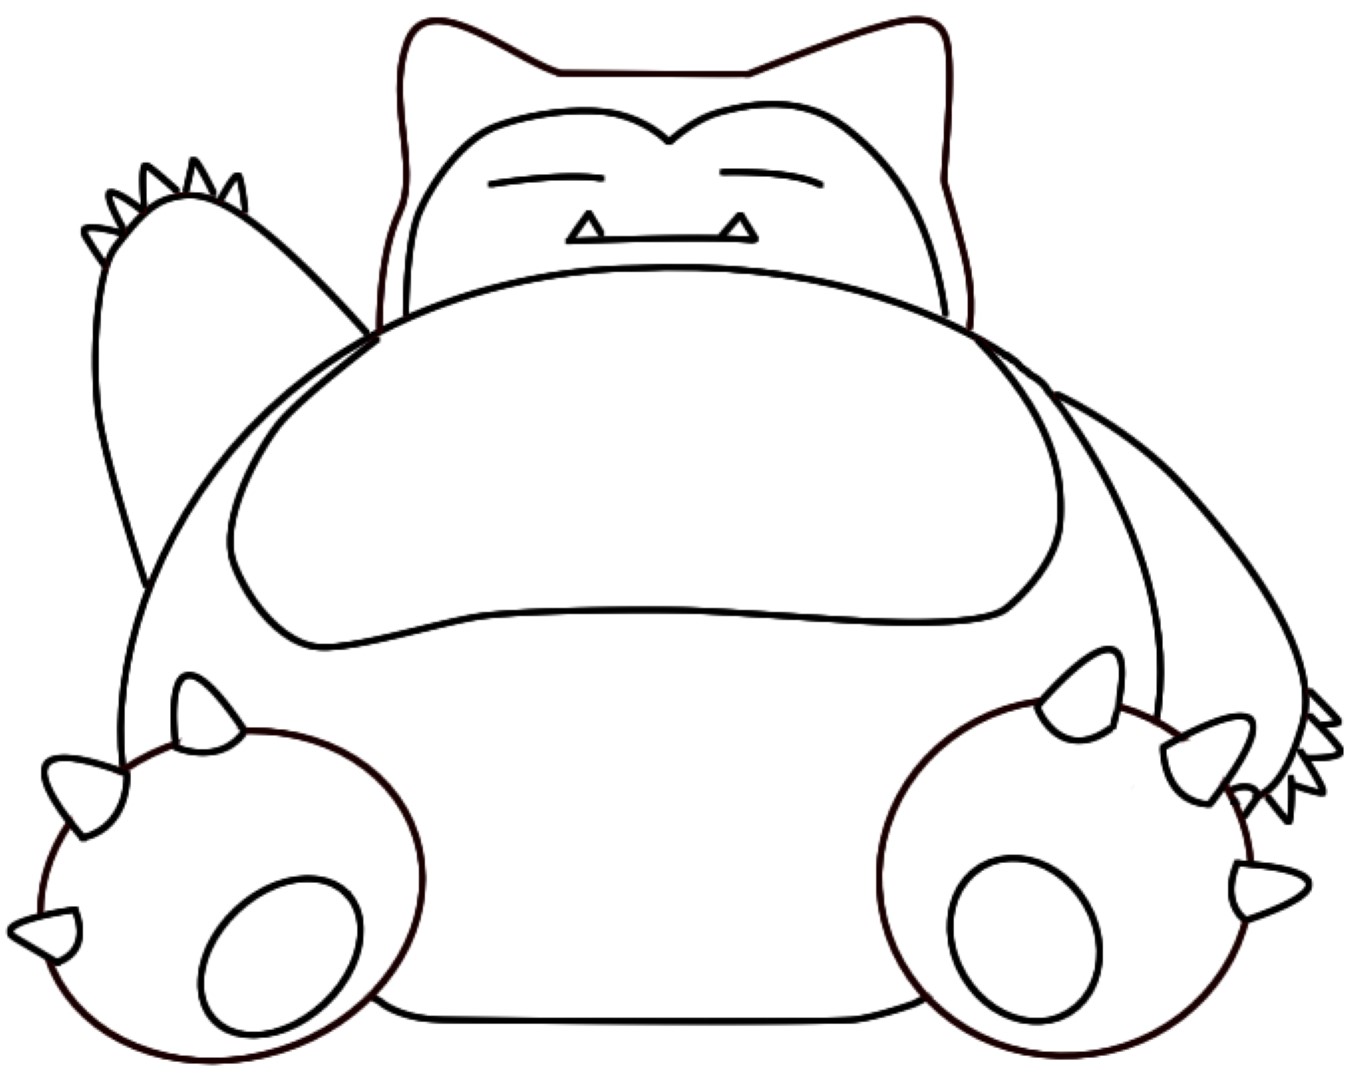 Pokemon Coloring Pages Snorlax at GetDrawings | Free download